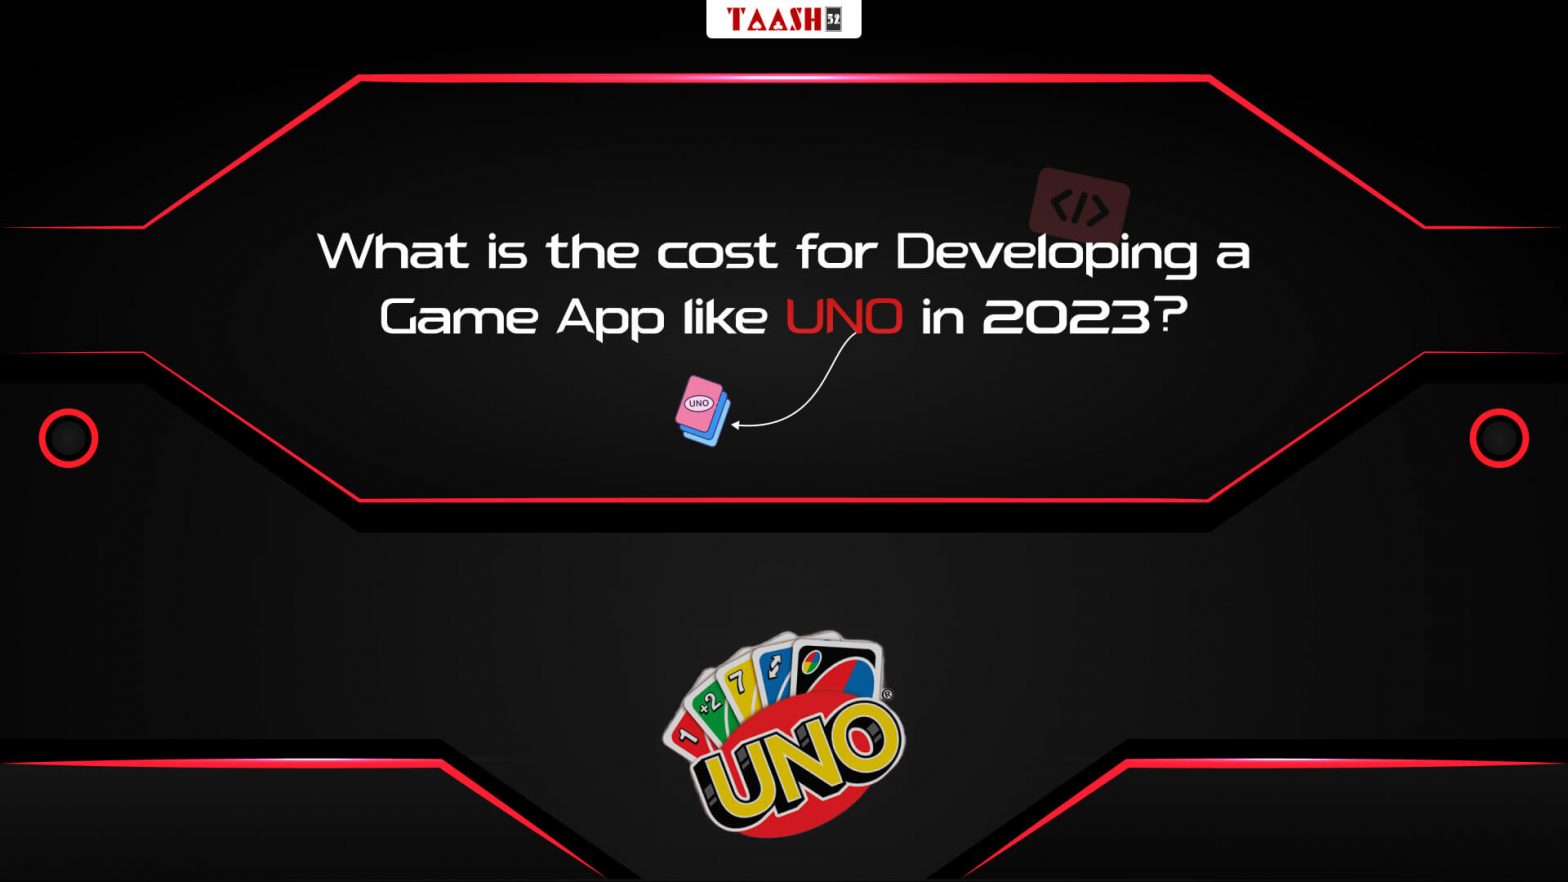 what is the cost for developing a game app like uno in 2023?